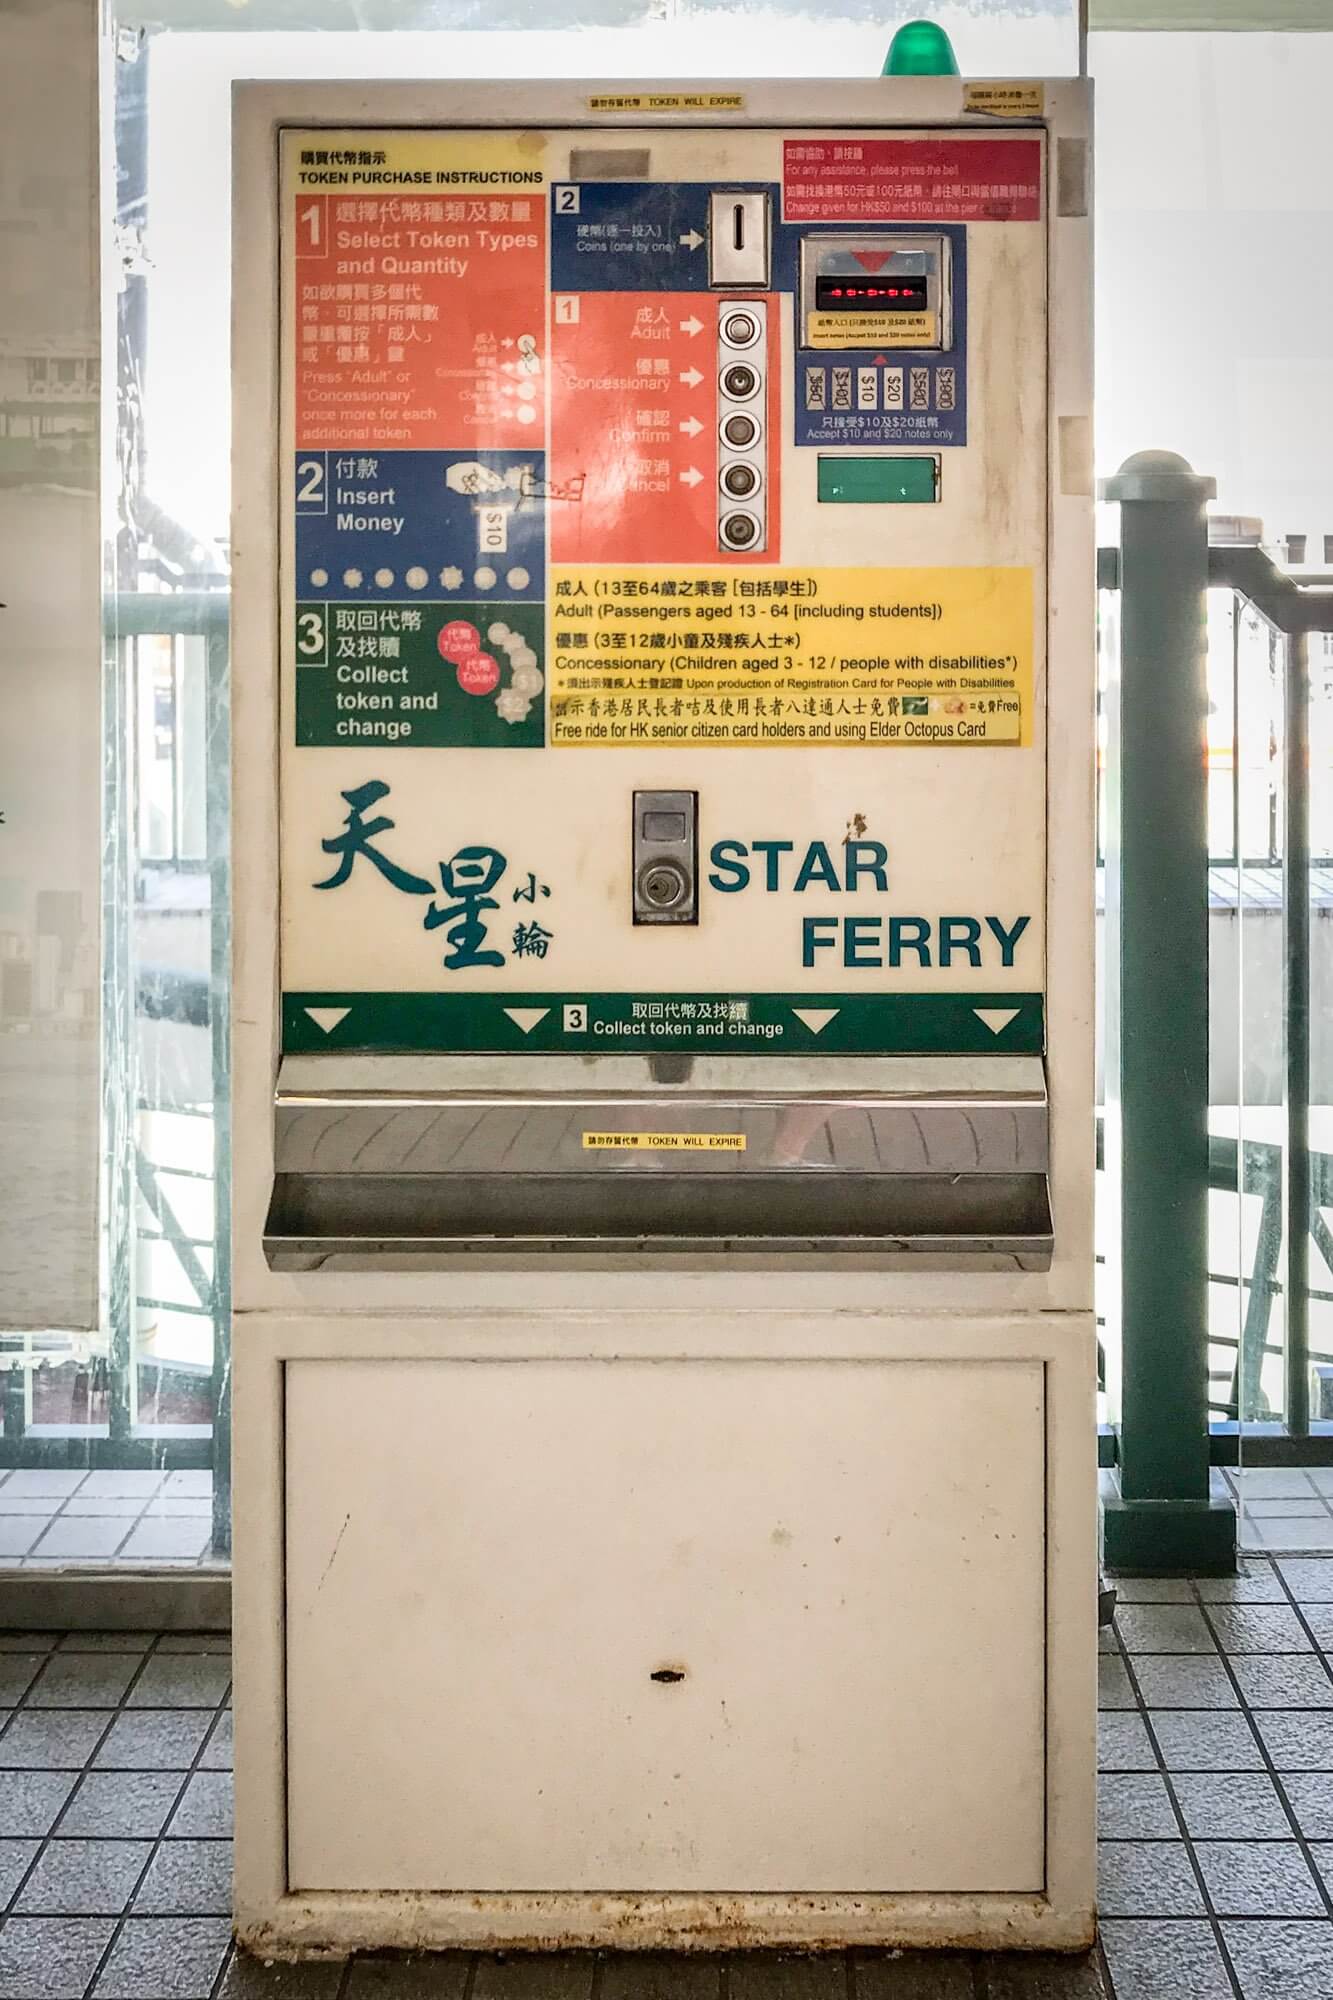 The vending machine selling Star Ferry tokens